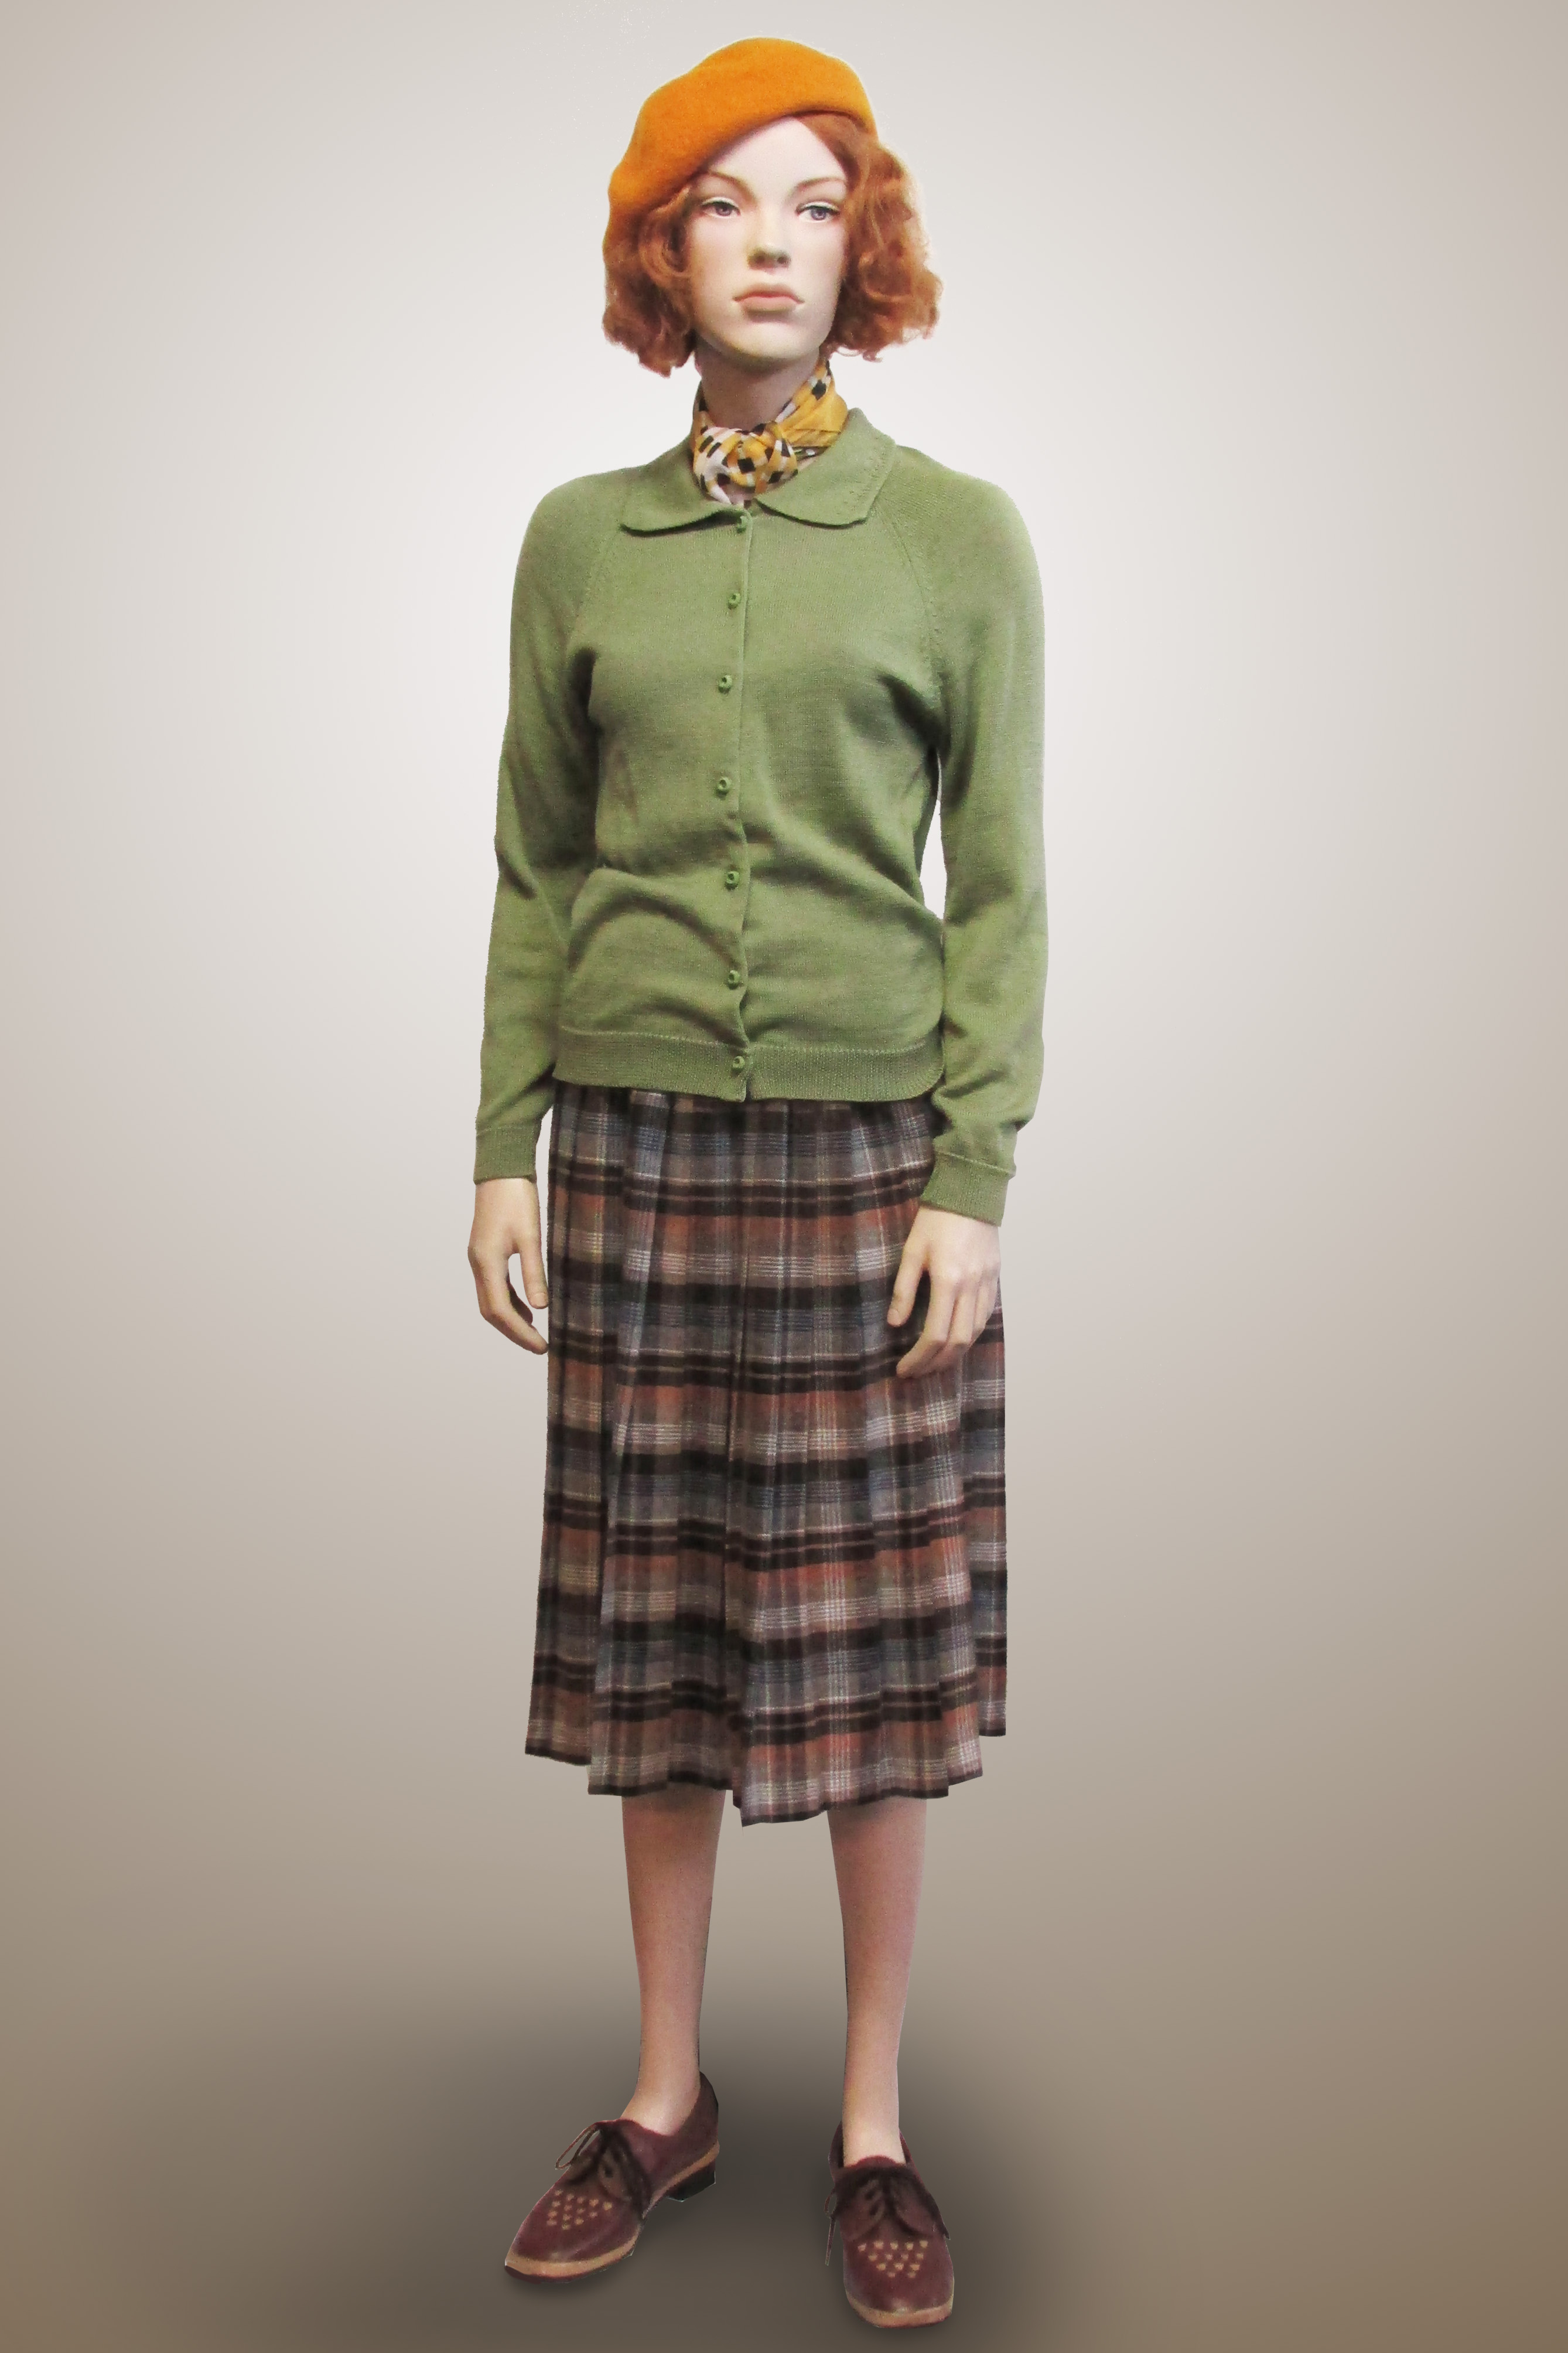 Checked Pleated Skirt with Green Cardigan 1960s